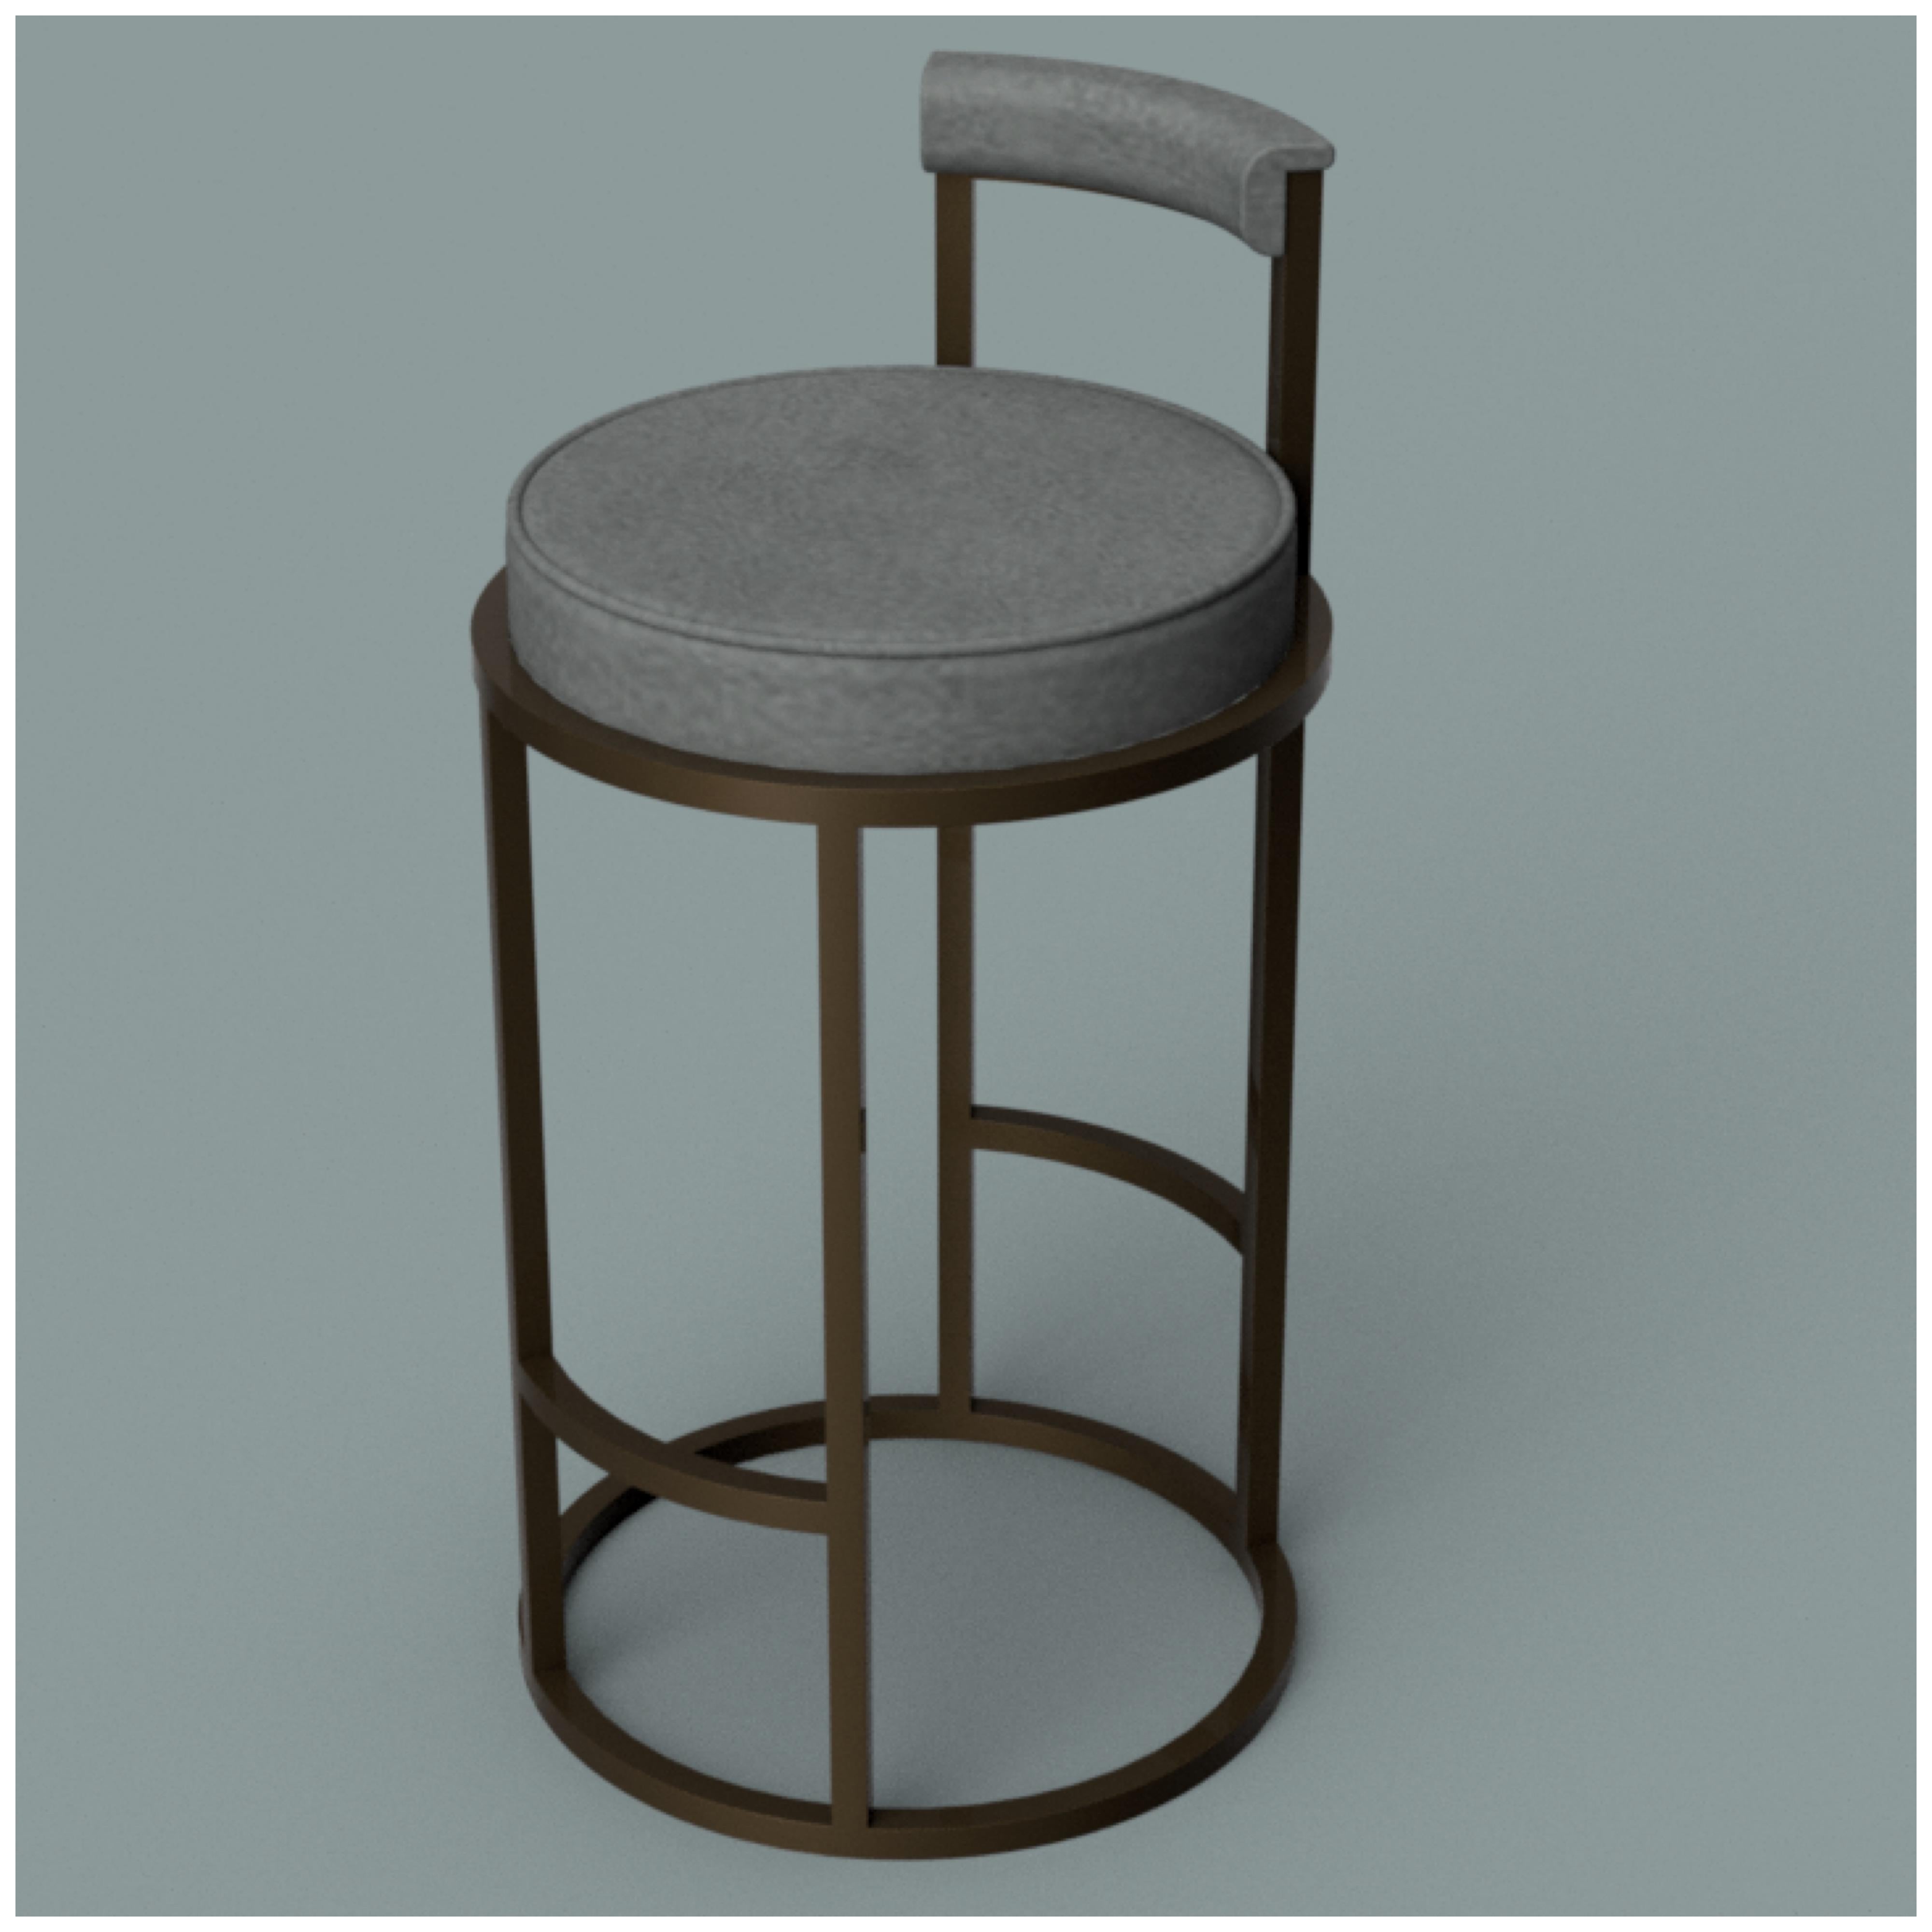 Art Deco Diana Bar Stool Circular with Back Rest in Steel Powder-Coated and Novasuede For Sale